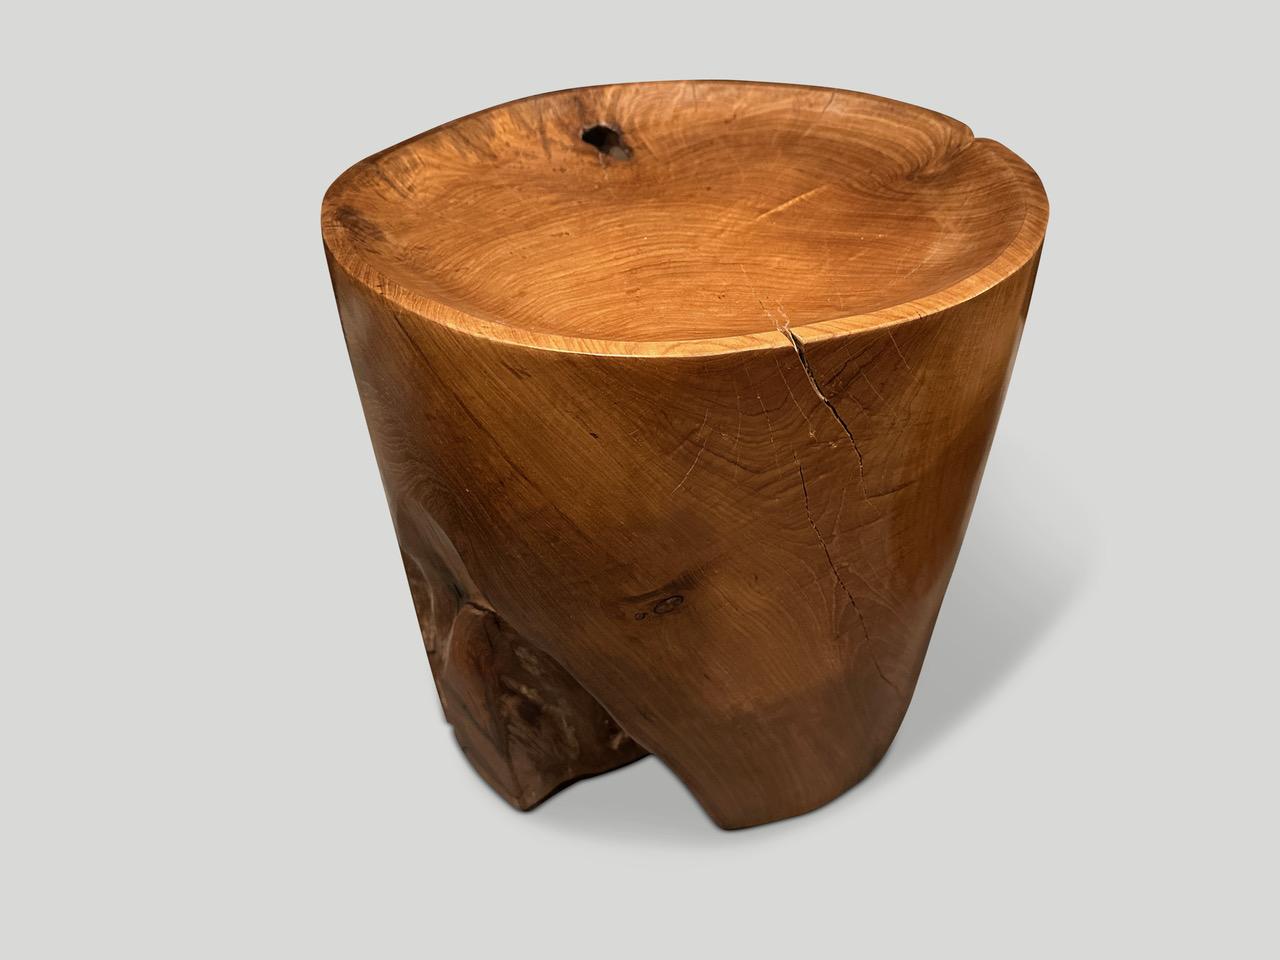 Andrianna Shamaris Sculptural Teak Wood Tray Side Table In Excellent Condition For Sale In New York, NY